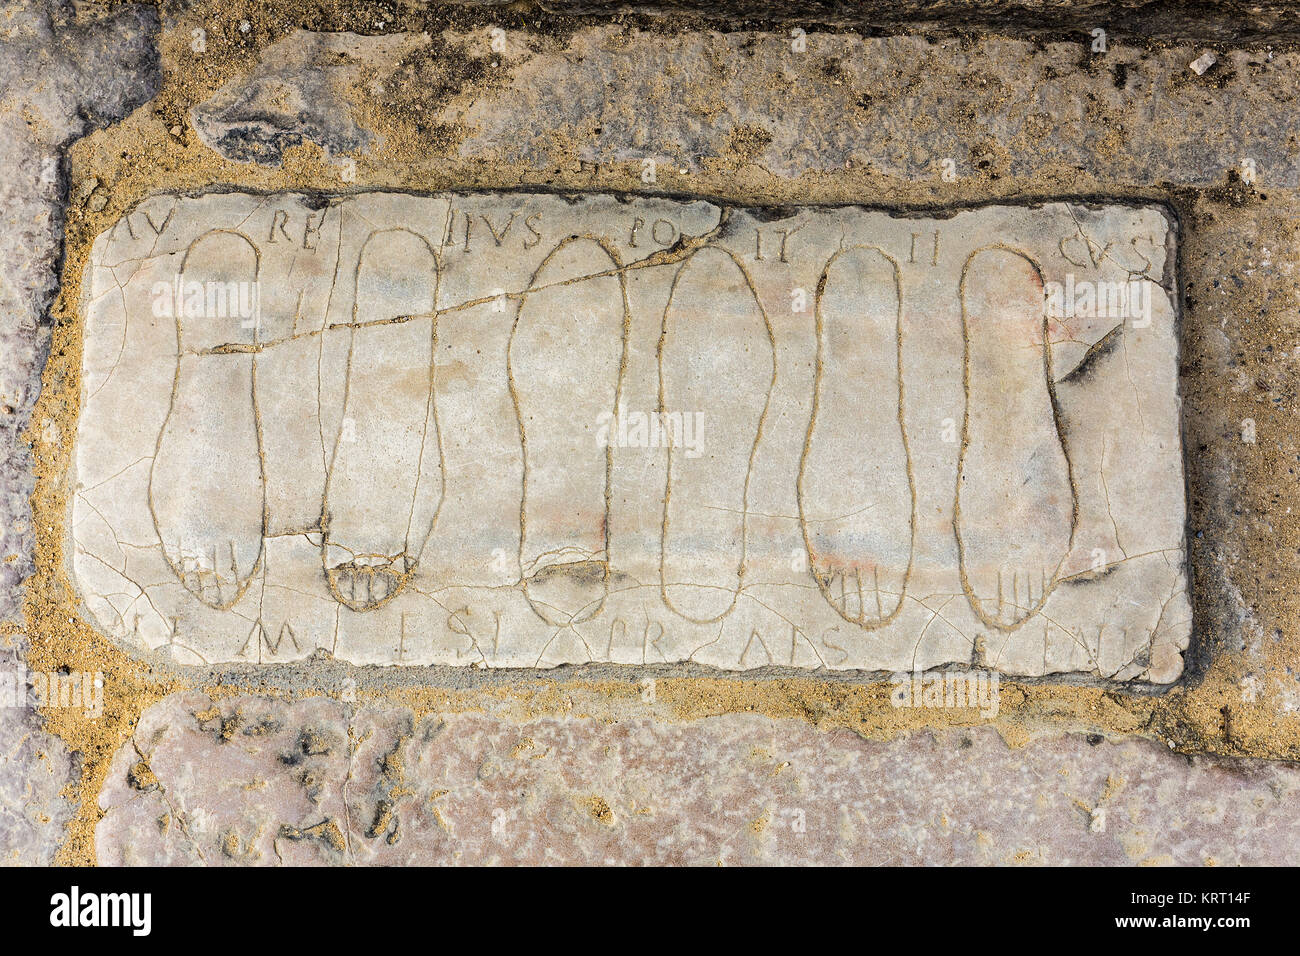 Santiponce, Spain - March 9, 2016: Amphitheatre of Italica. Votive tablet on the floor of the entrance, dedicated to Nemesis. talica; north of modern  Stock Photo